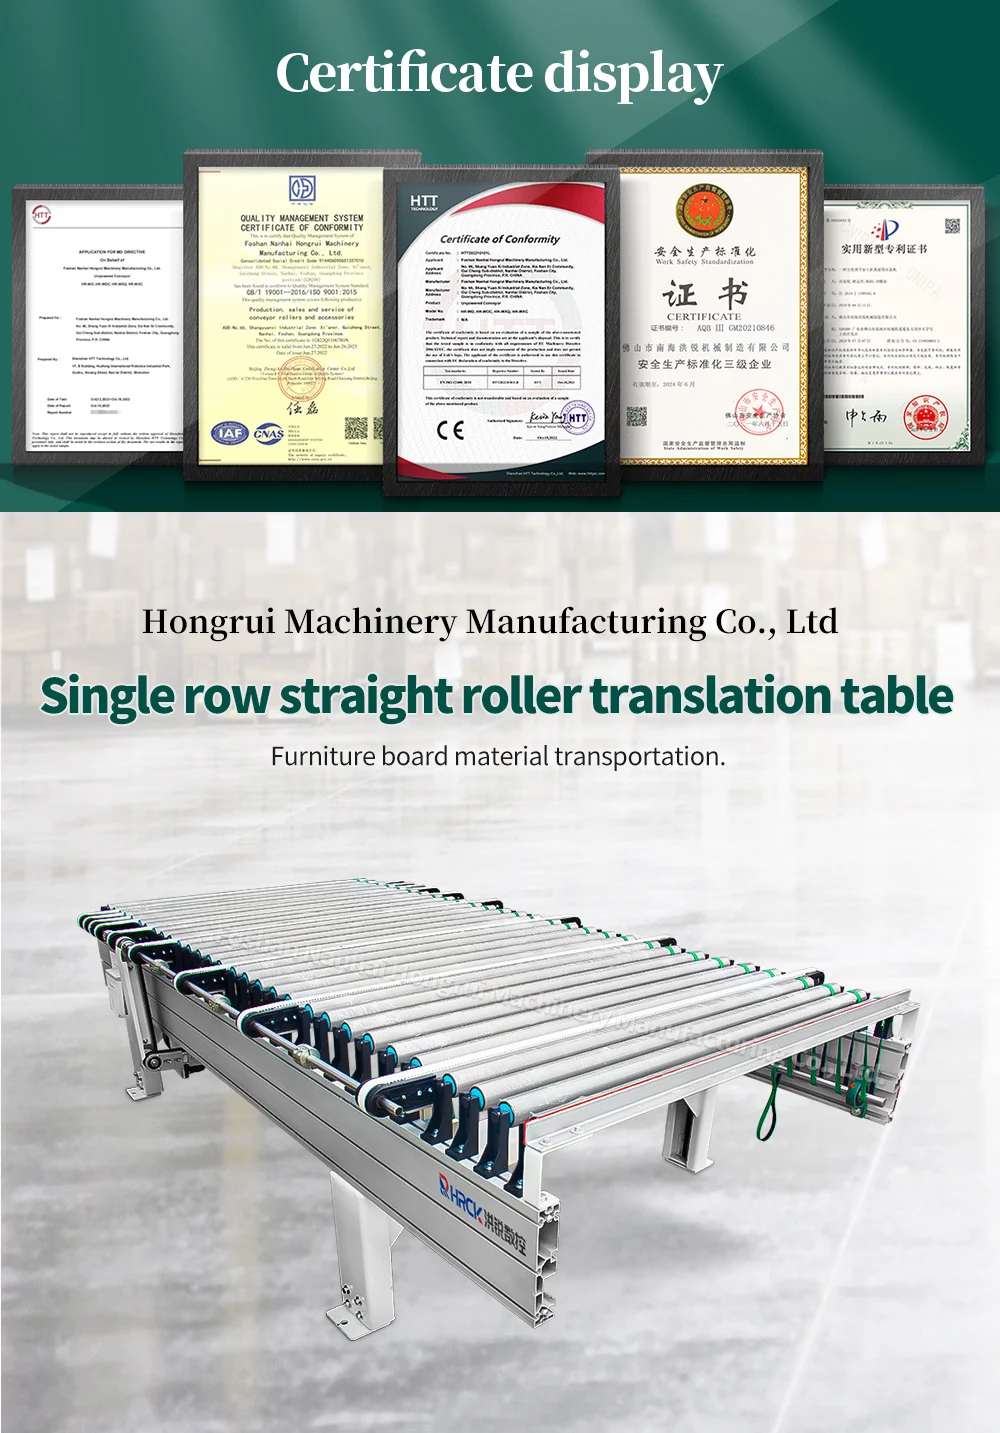 Smooth Material Transport Made Easy: Explore our Single-Line Roller Conveyor Range details